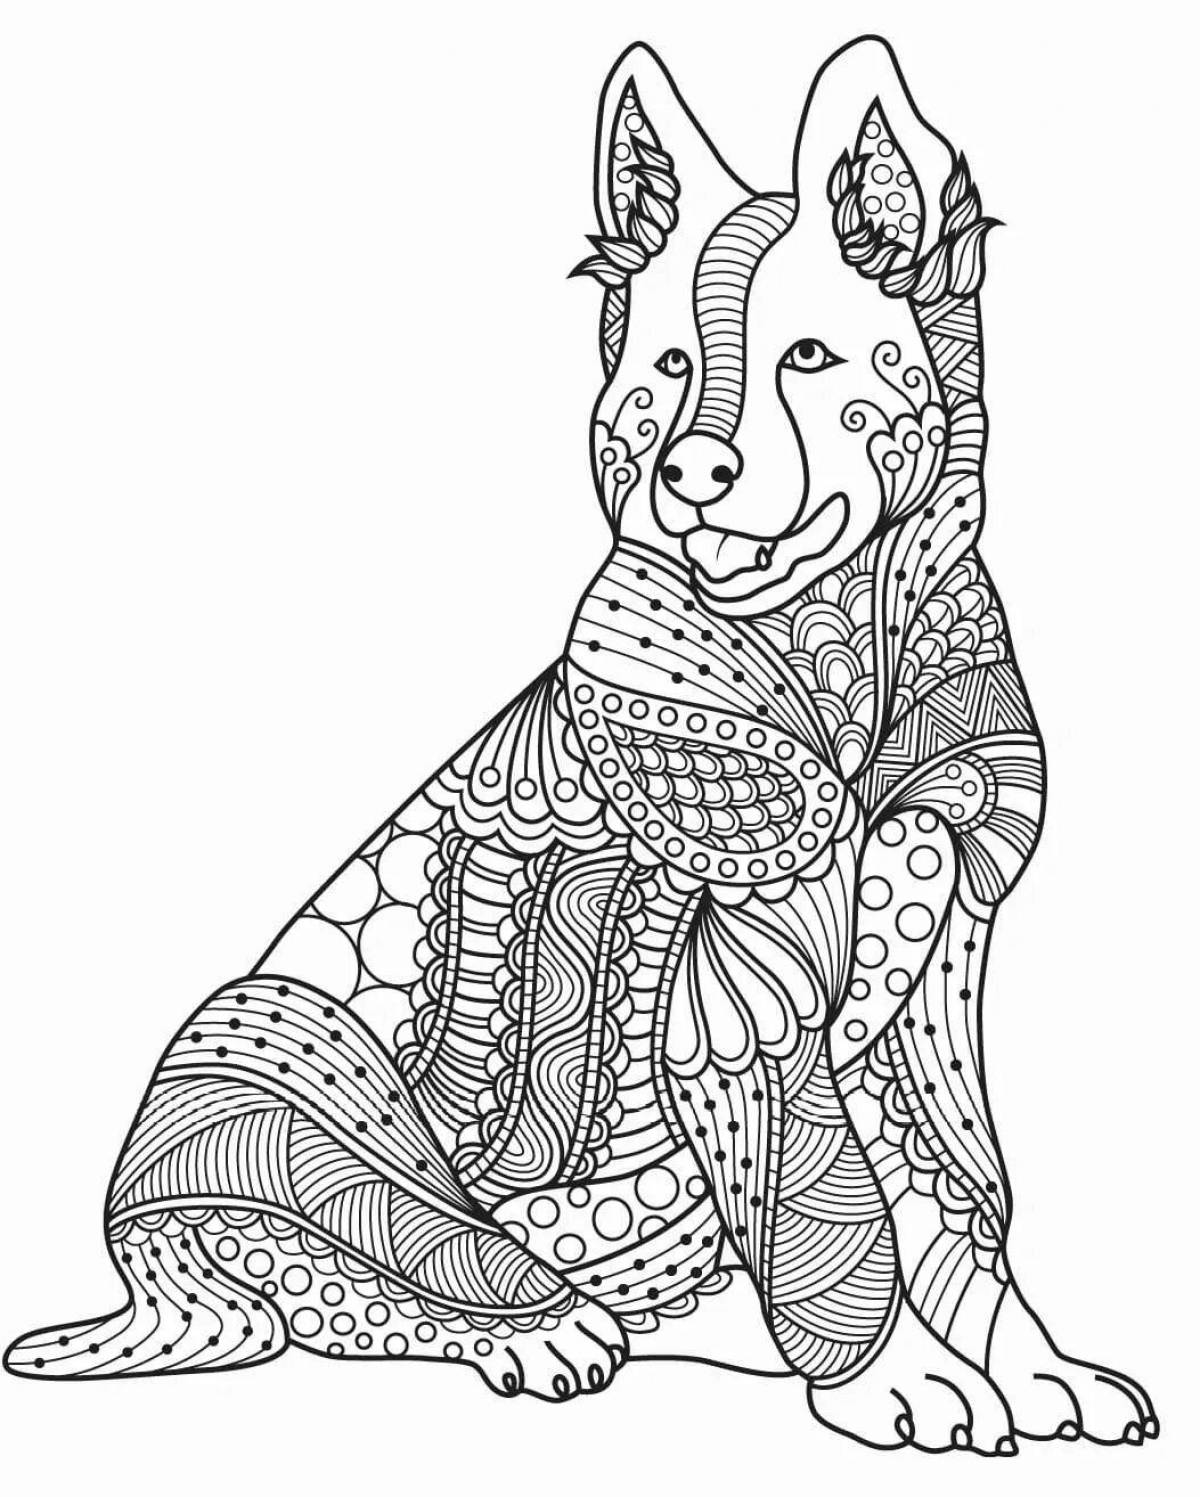 Inquisitive dog coloring pages for adults